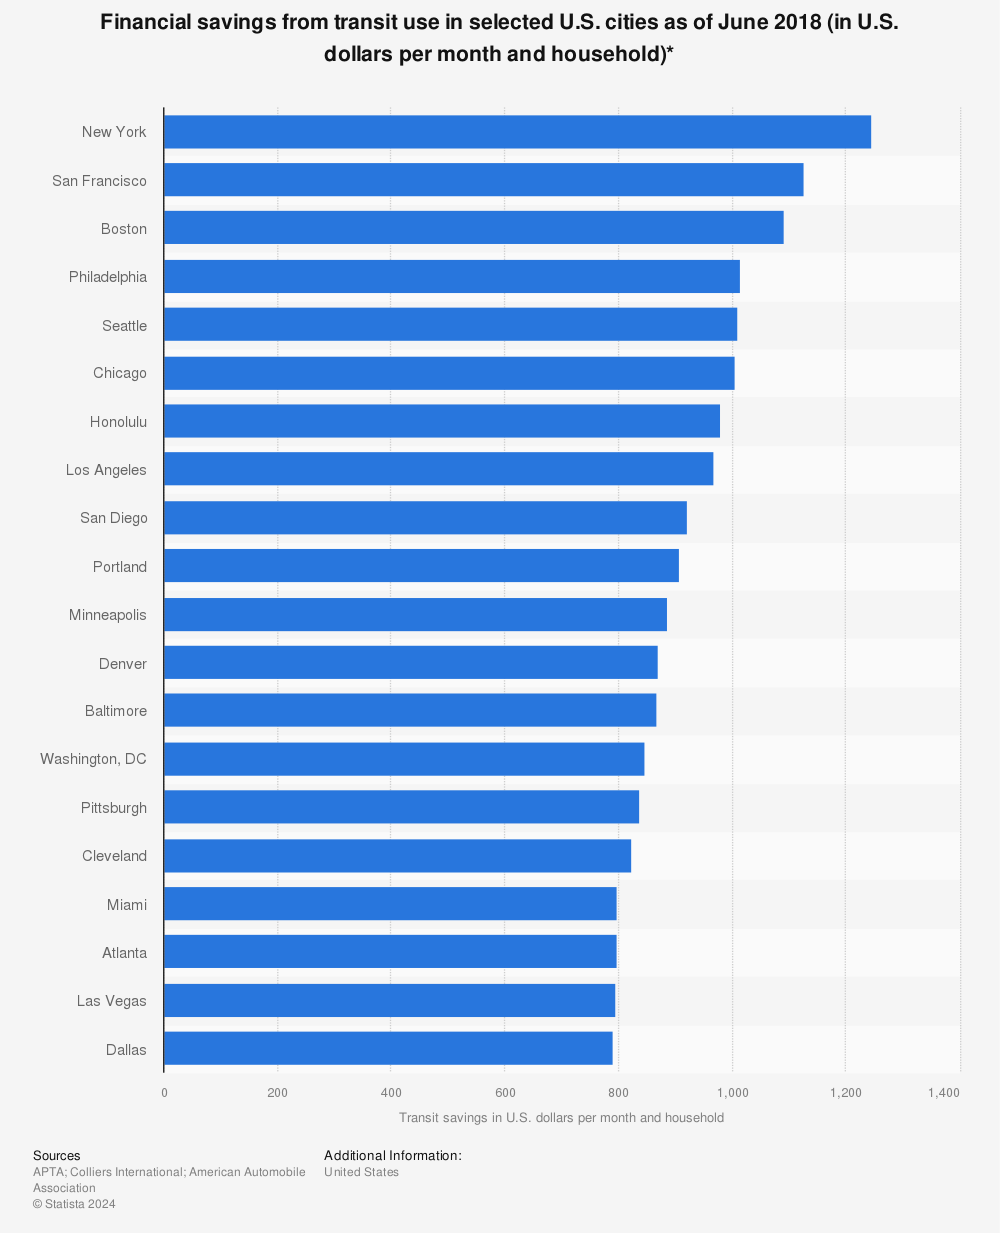 Statistic: Financial savings from transit use in selected U.S. cities as of June 2018 (in U.S. dollars per month and household)* | Statista